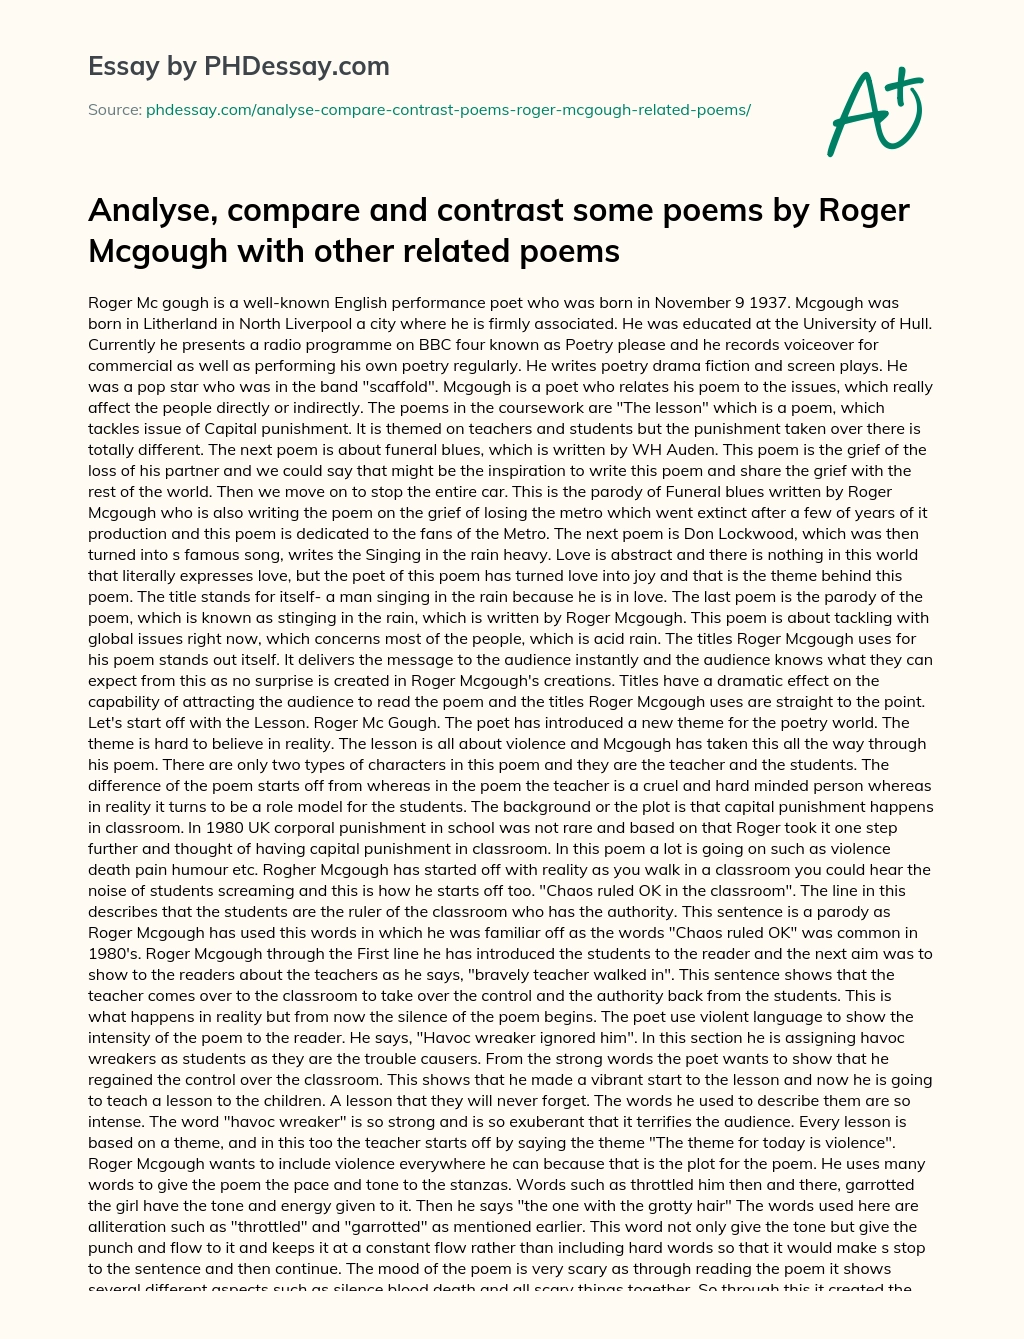 Analyse, compare and contrast some poems by Roger Mcgough with other related poems essay